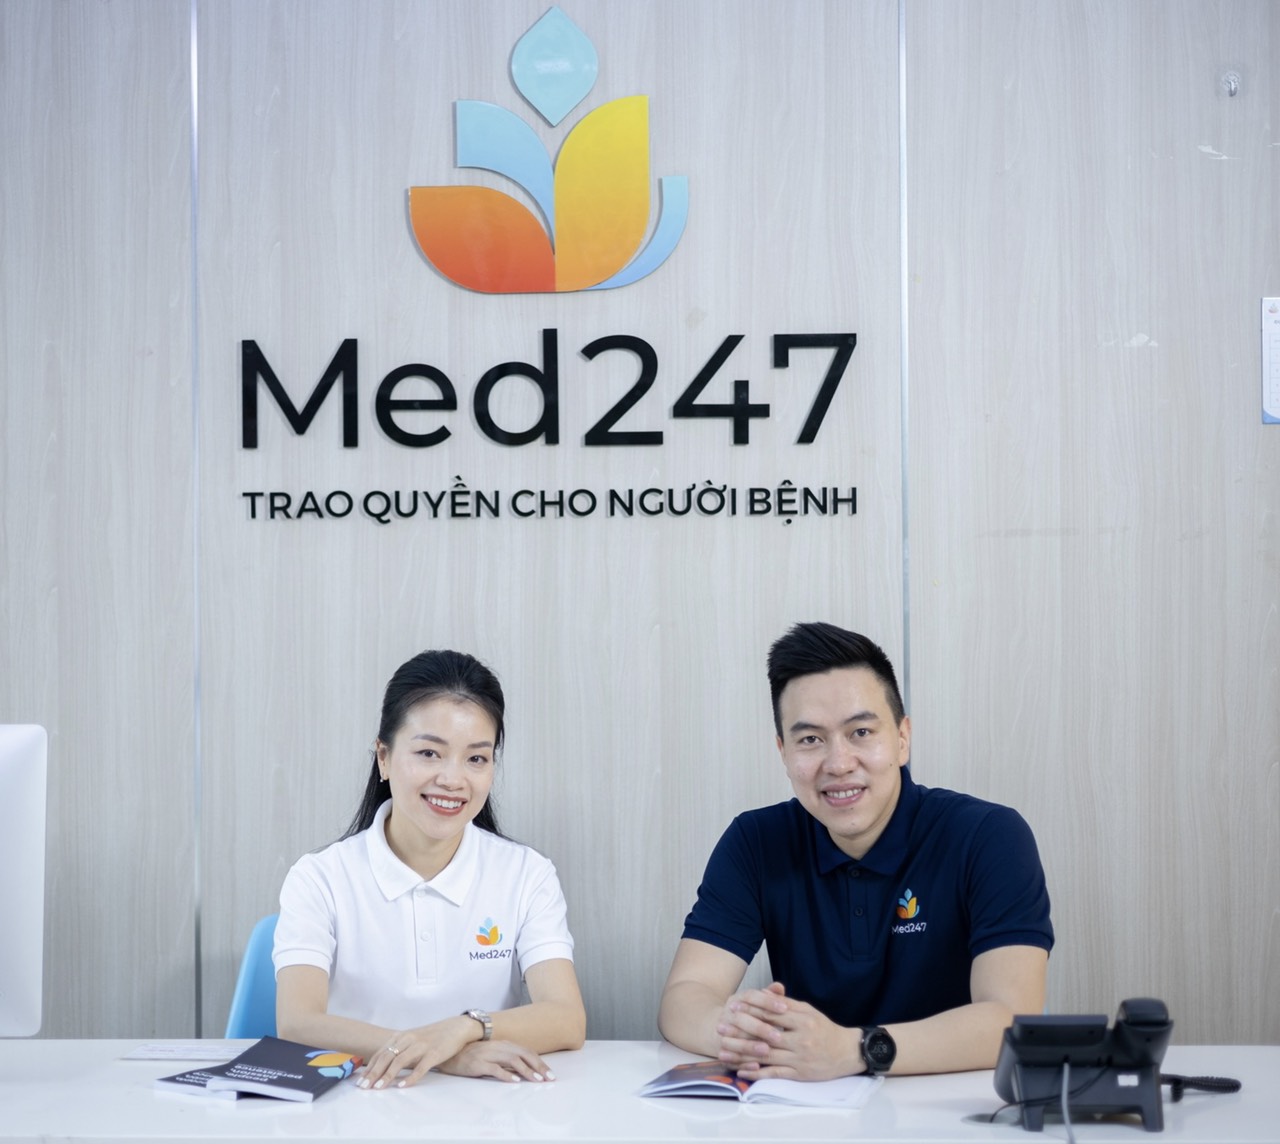 Dream of providing all patients with same medical services in Vietnam